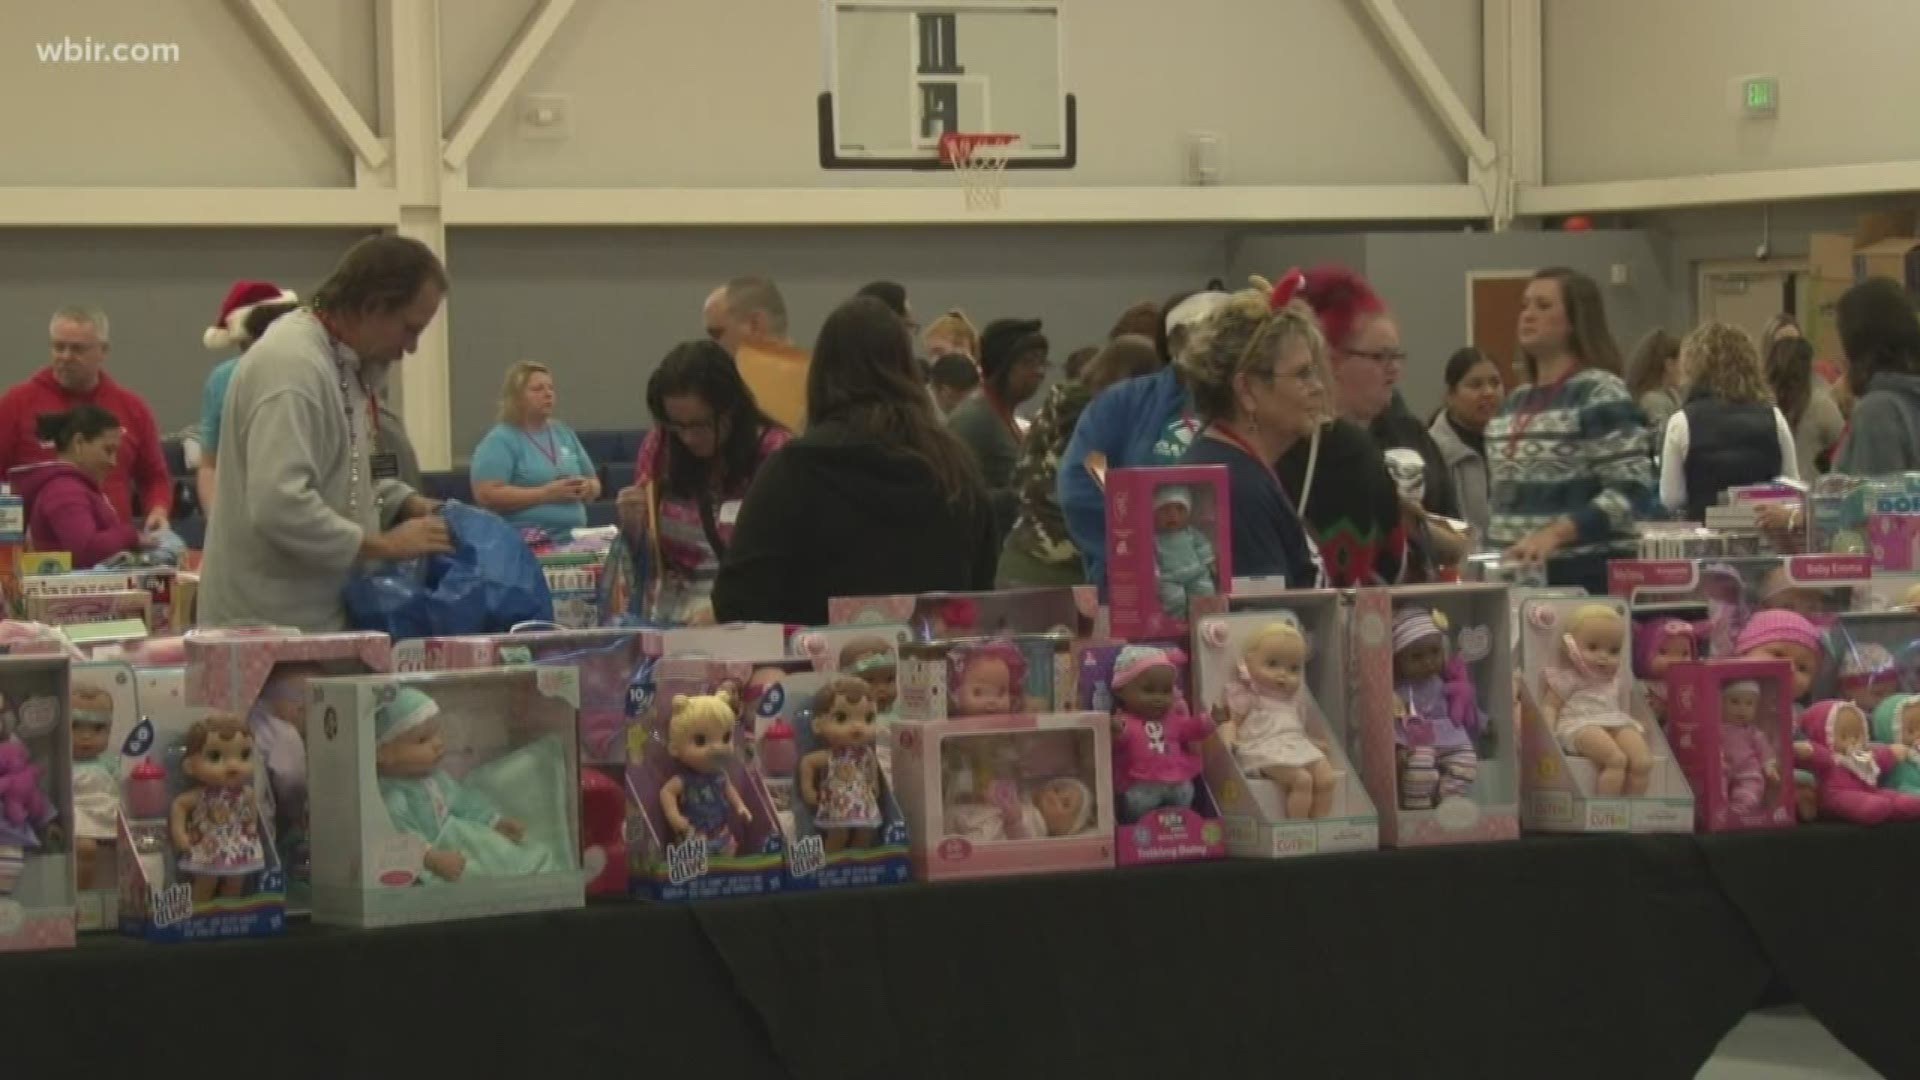 Last year, the "All is Bright" event provided Christmas presents for more than 2,500 children.